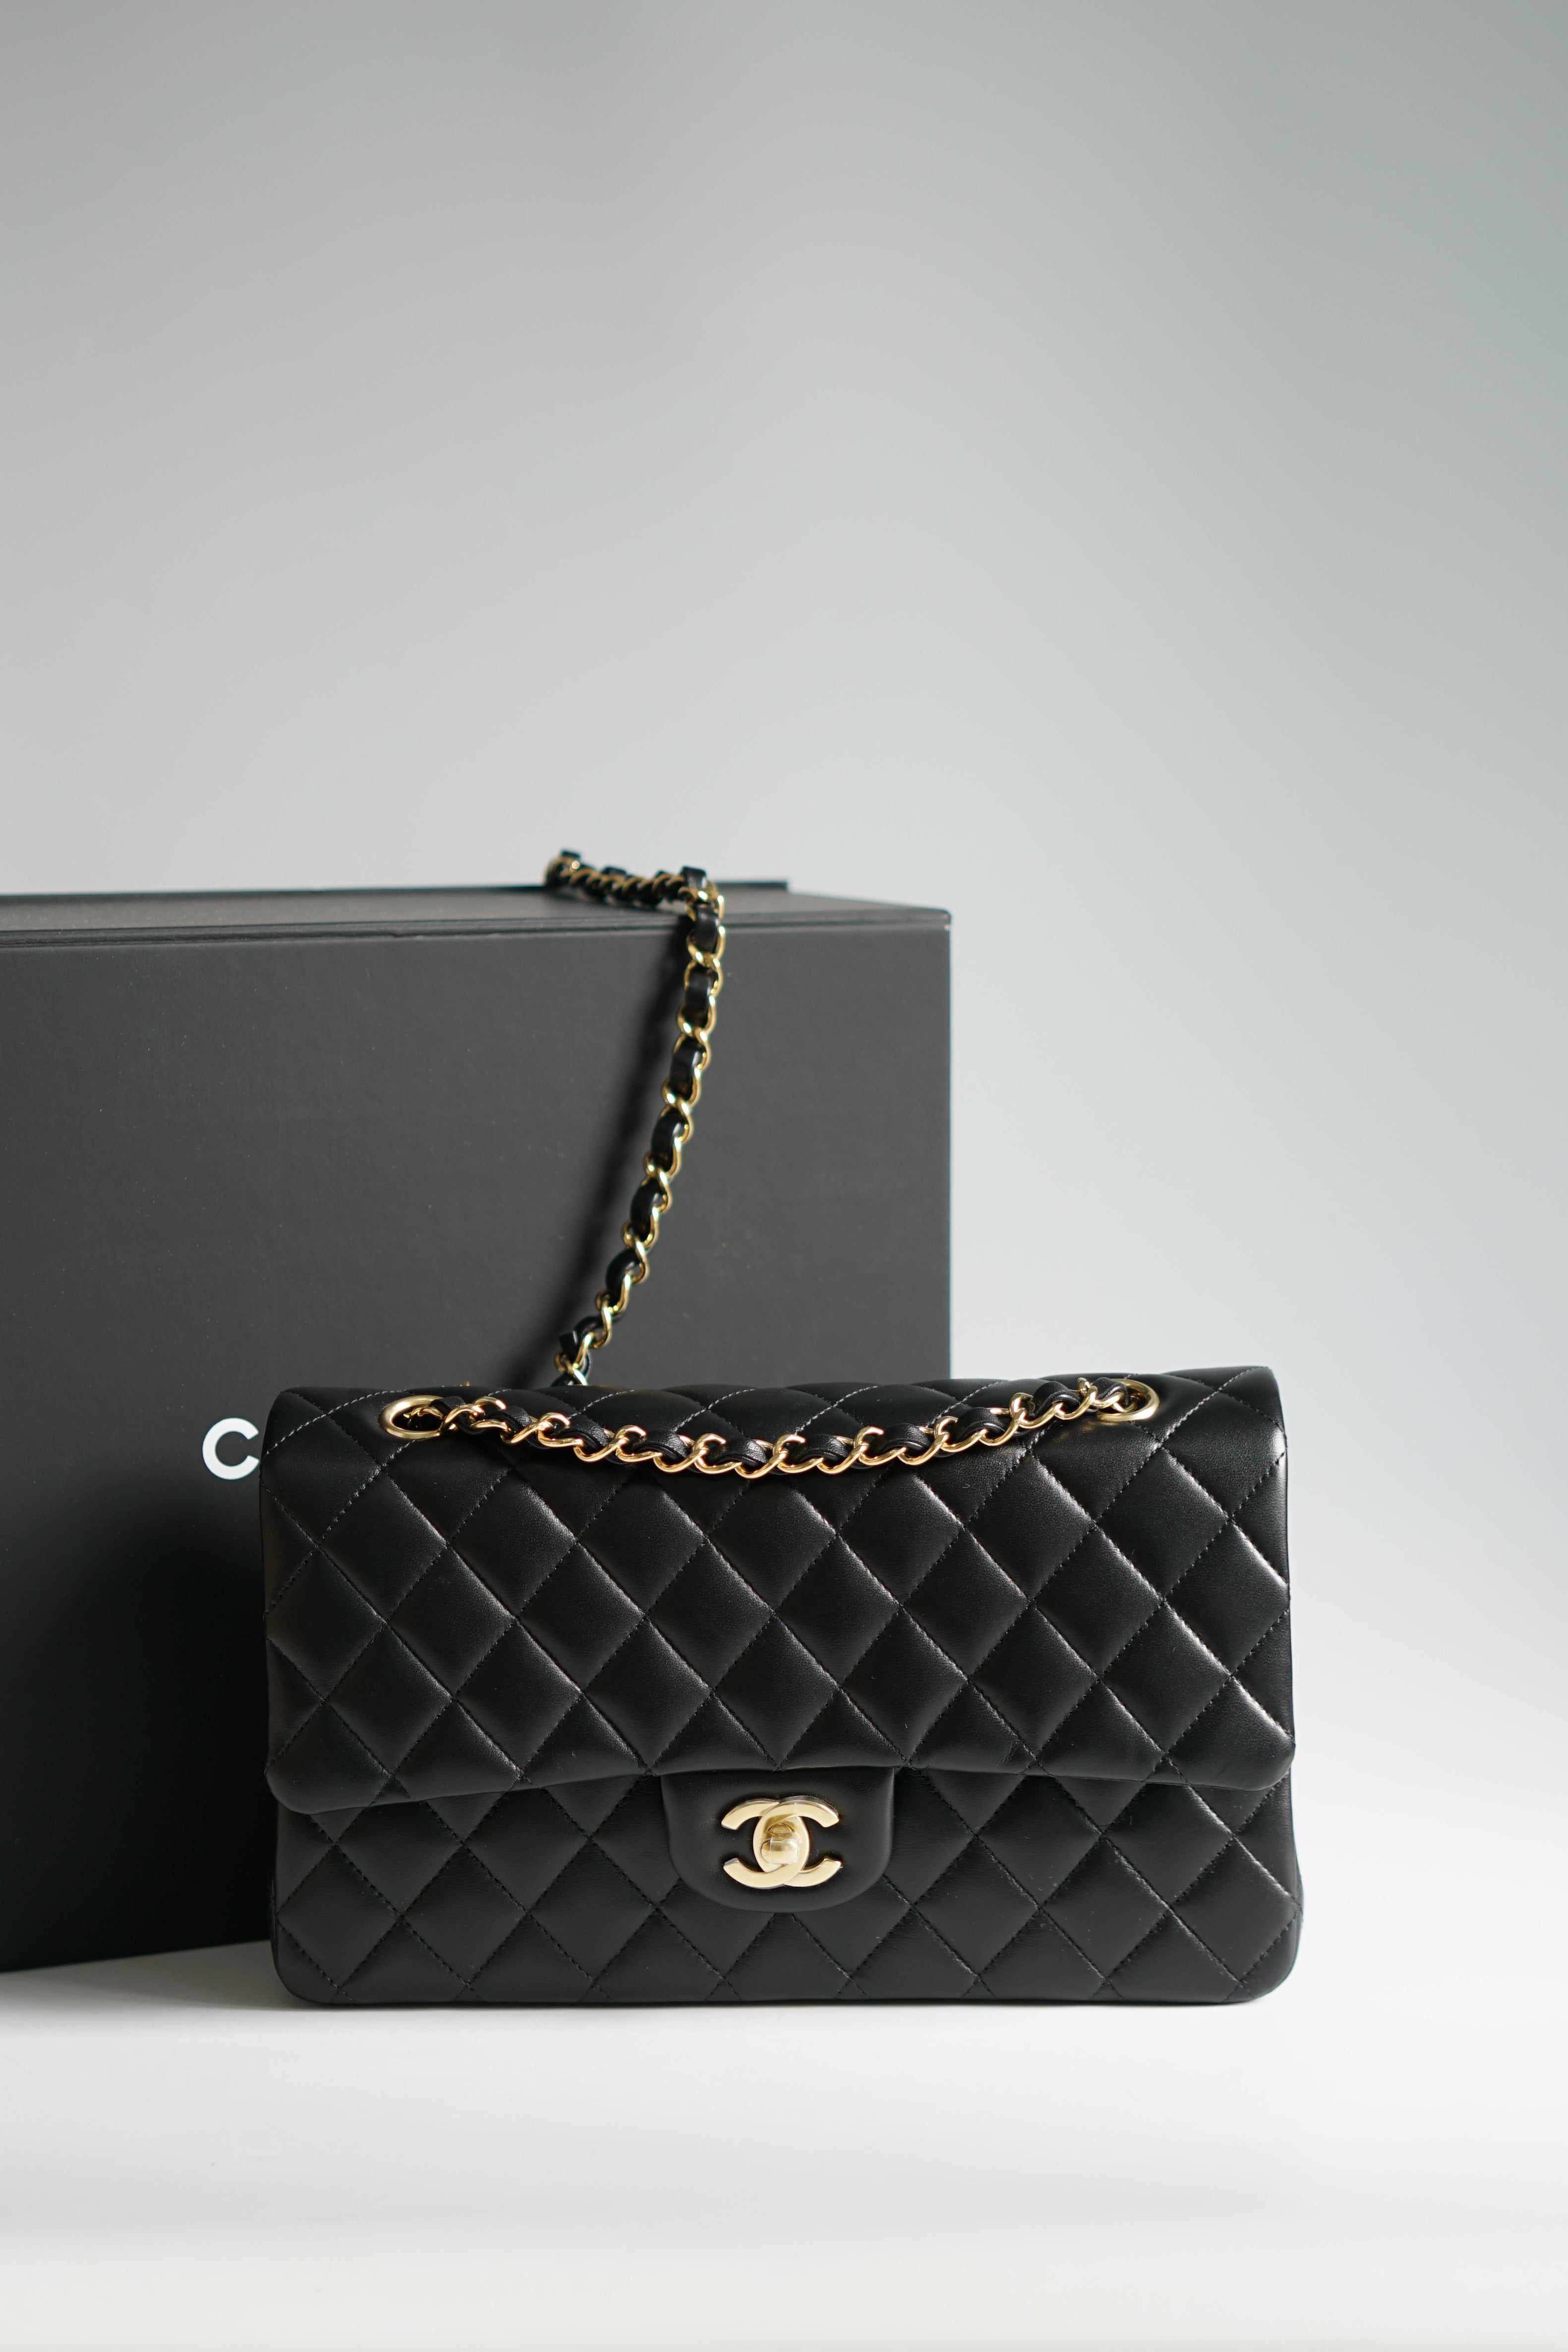 Chanel Boy Old Medium in Black Caviar Leather and Aged